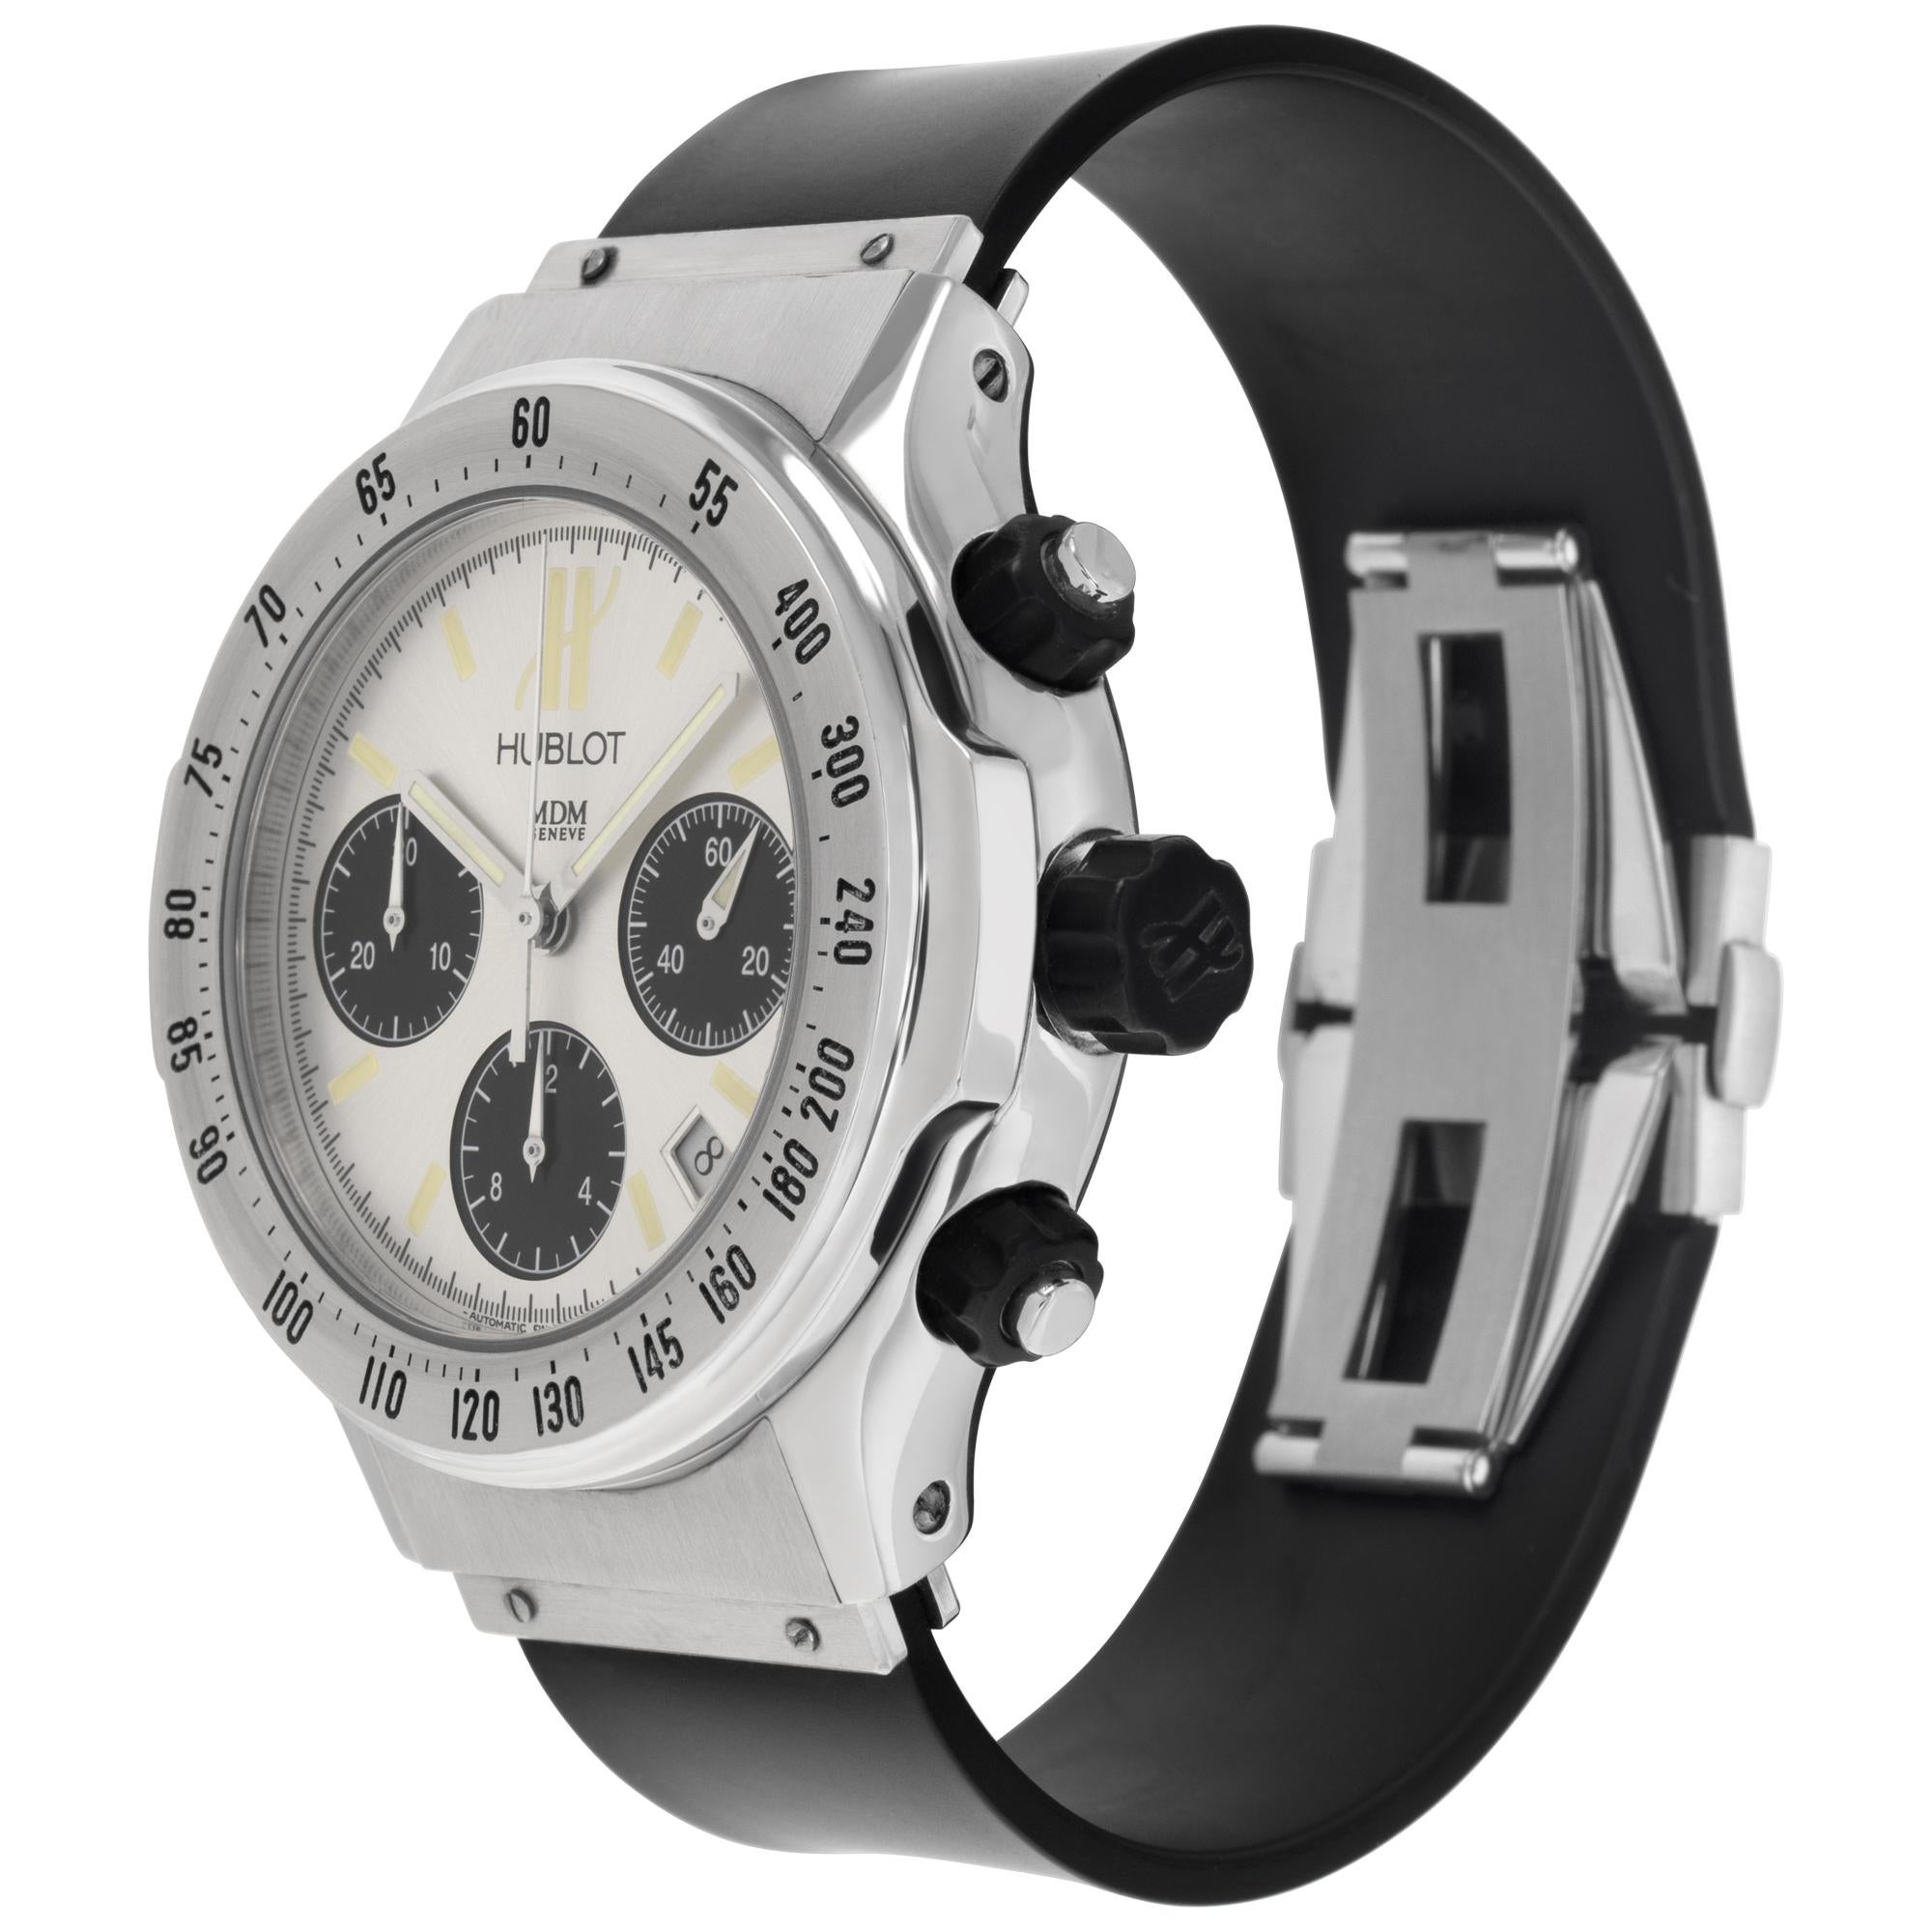 Hublot Super B Chronograph in stainless steel with silver and black panda dial. Auto w/ chronograph and sub-seconds. 42 mm case size. Ref 1920.1. Will fit a 7.75 inch wrist size with current rubber strap. Fine Pre-owned Hublot Watch.

 Certified